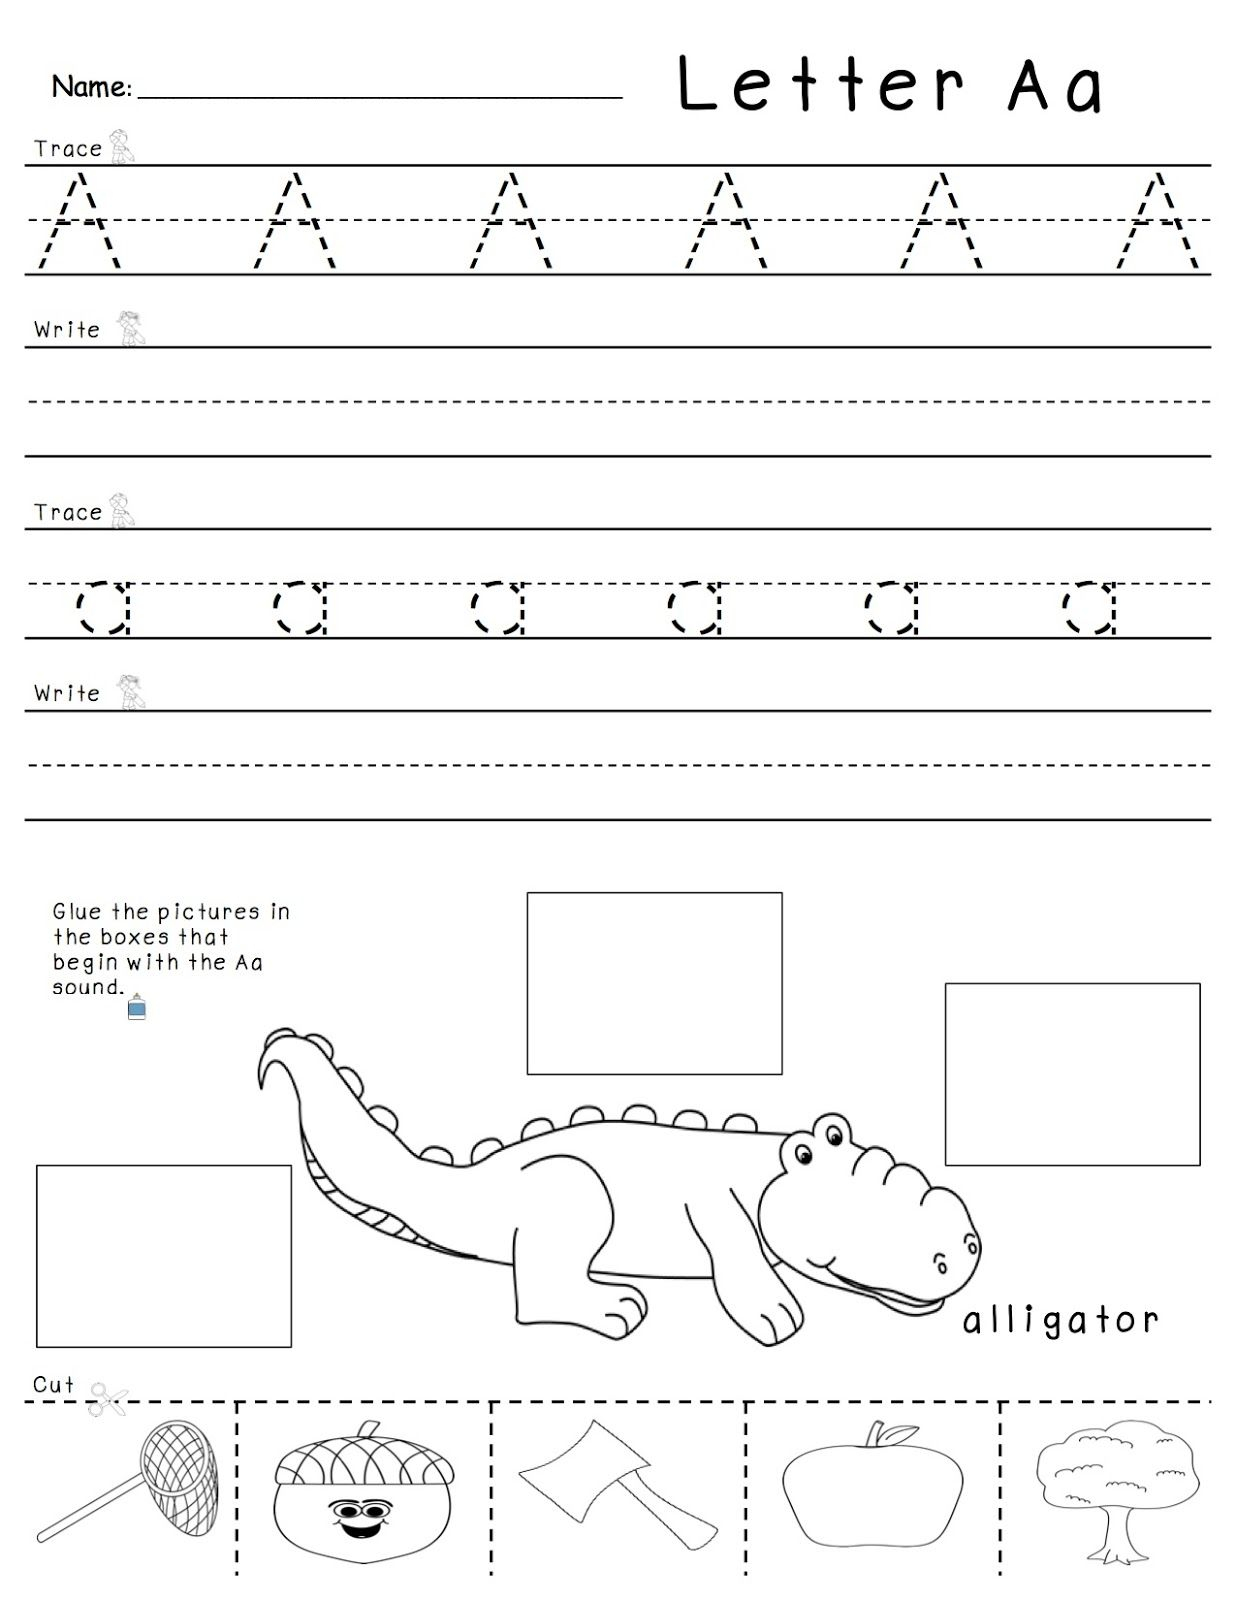 Letter And Letter Sounds Practice! | Lettering, Phonics